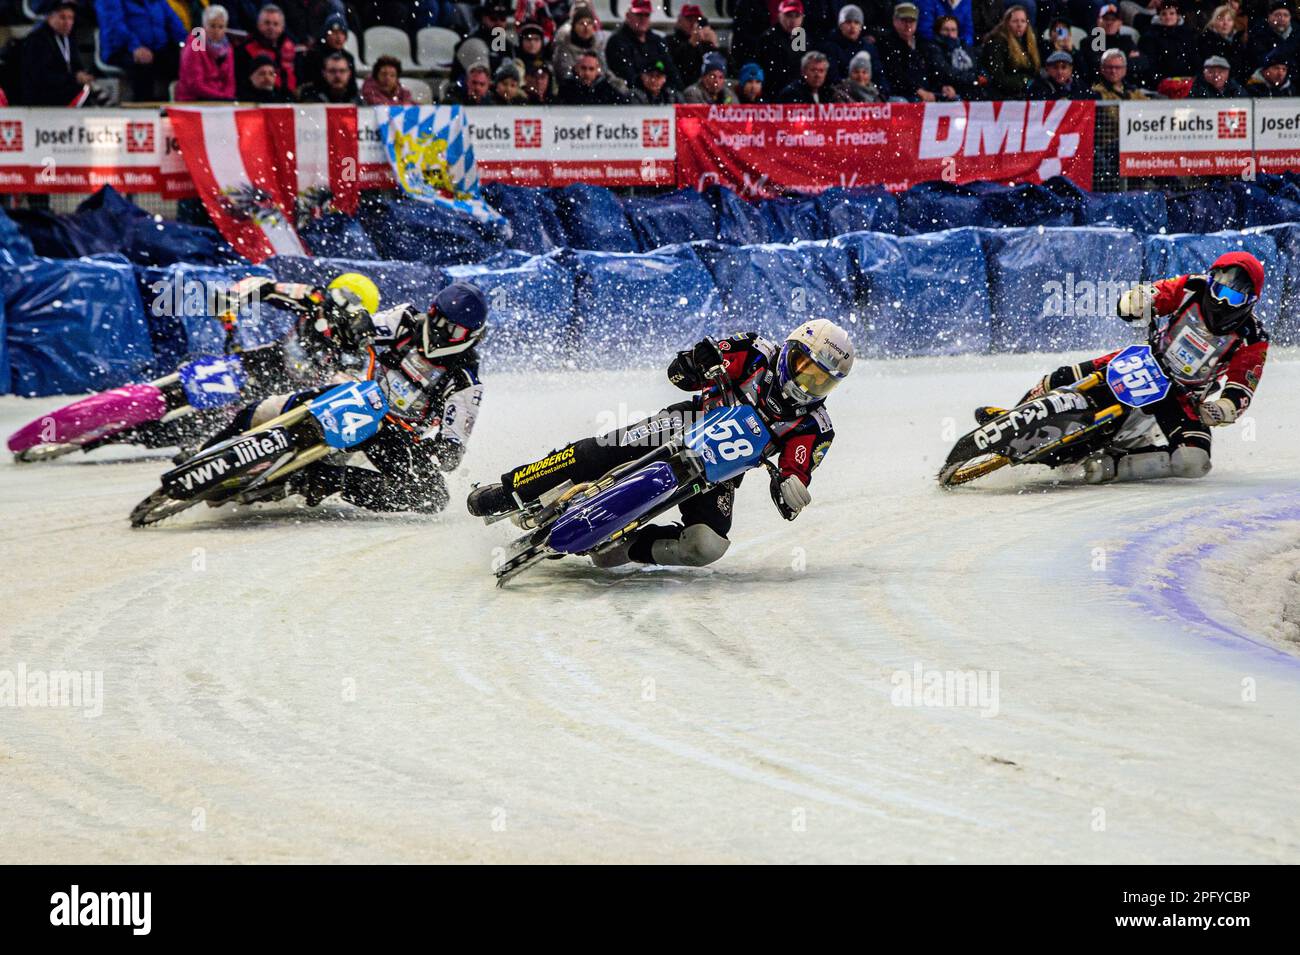 Inzell, Germany on Sunday 19th March 2023. Stefan Svensson (58)(White) leads Mats Järf (74) (Blue) Benedikt Monn (17) (Yellow) and Jo Saetre (357) (Red) during the Ice Speedway Gladiators World Championship Final 2 at Max-Aicher-Arena, Inzell, Germany on Sunday 19th March 2023. (Photo: Ian Charles | MI News) Credit: MI News & Sport /Alamy Live News Stock Photo